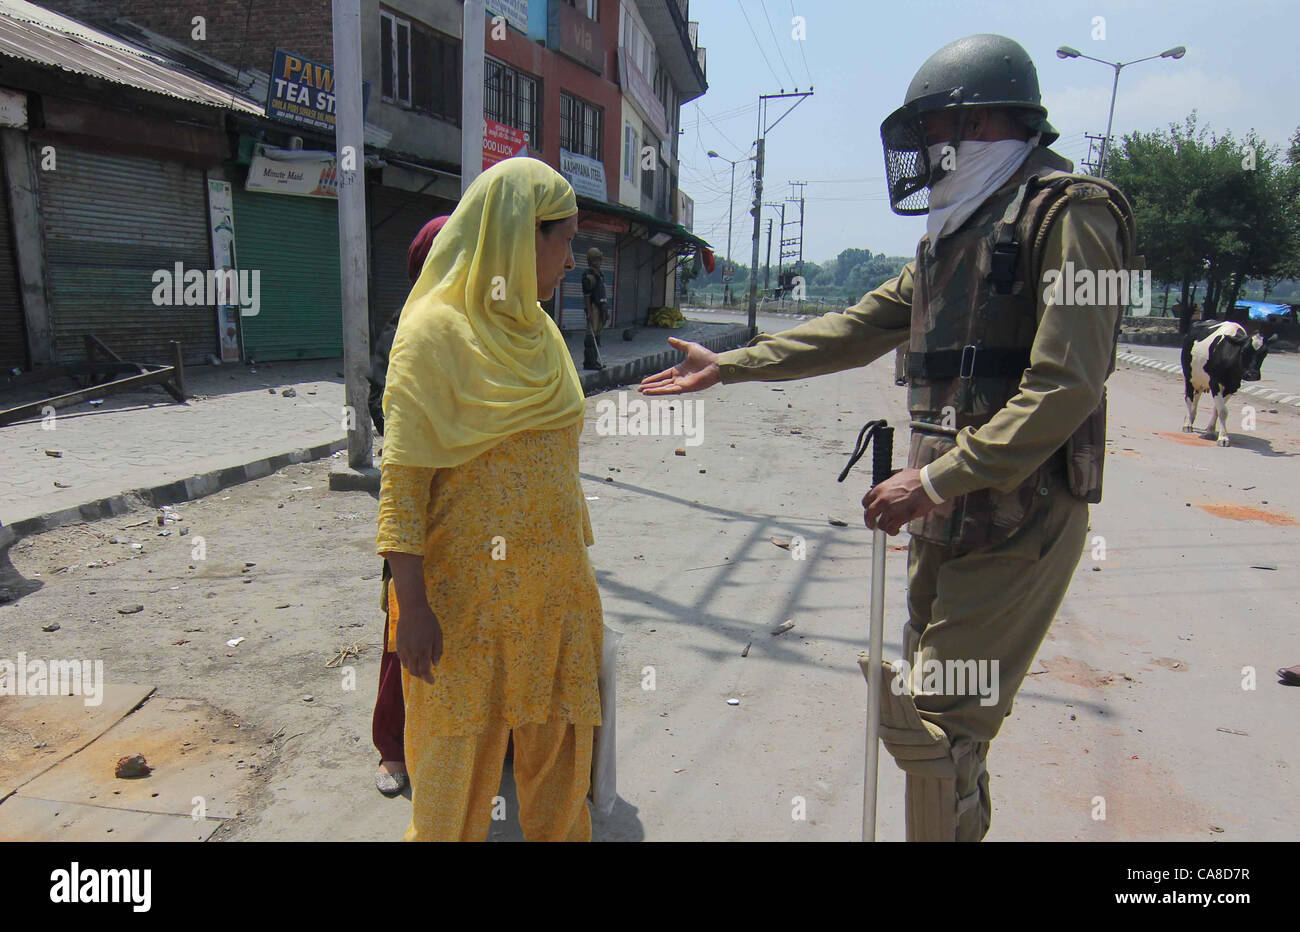 An Indian police questioning a Kashmiri Muslim woman during a curfew in downtown area of Srinagr, the summer capital of Indian Kashmir, 26, June, 2012,Undeclared curfew-like restrictions were imposed in the old city areas of Srinagar Tuesday following tension in the city over the gutting of the revered shrine of Sheikh Abdul Qadir Jeelani in the Khanyar area.Although no official announcement to this effect was made, police and paramilitary Central Reserve Police Force (CRPF) deployed in riot control gear disallowed pedestrian and vehicular movement in old city areas falling under the Khanyar,  Stock Photo